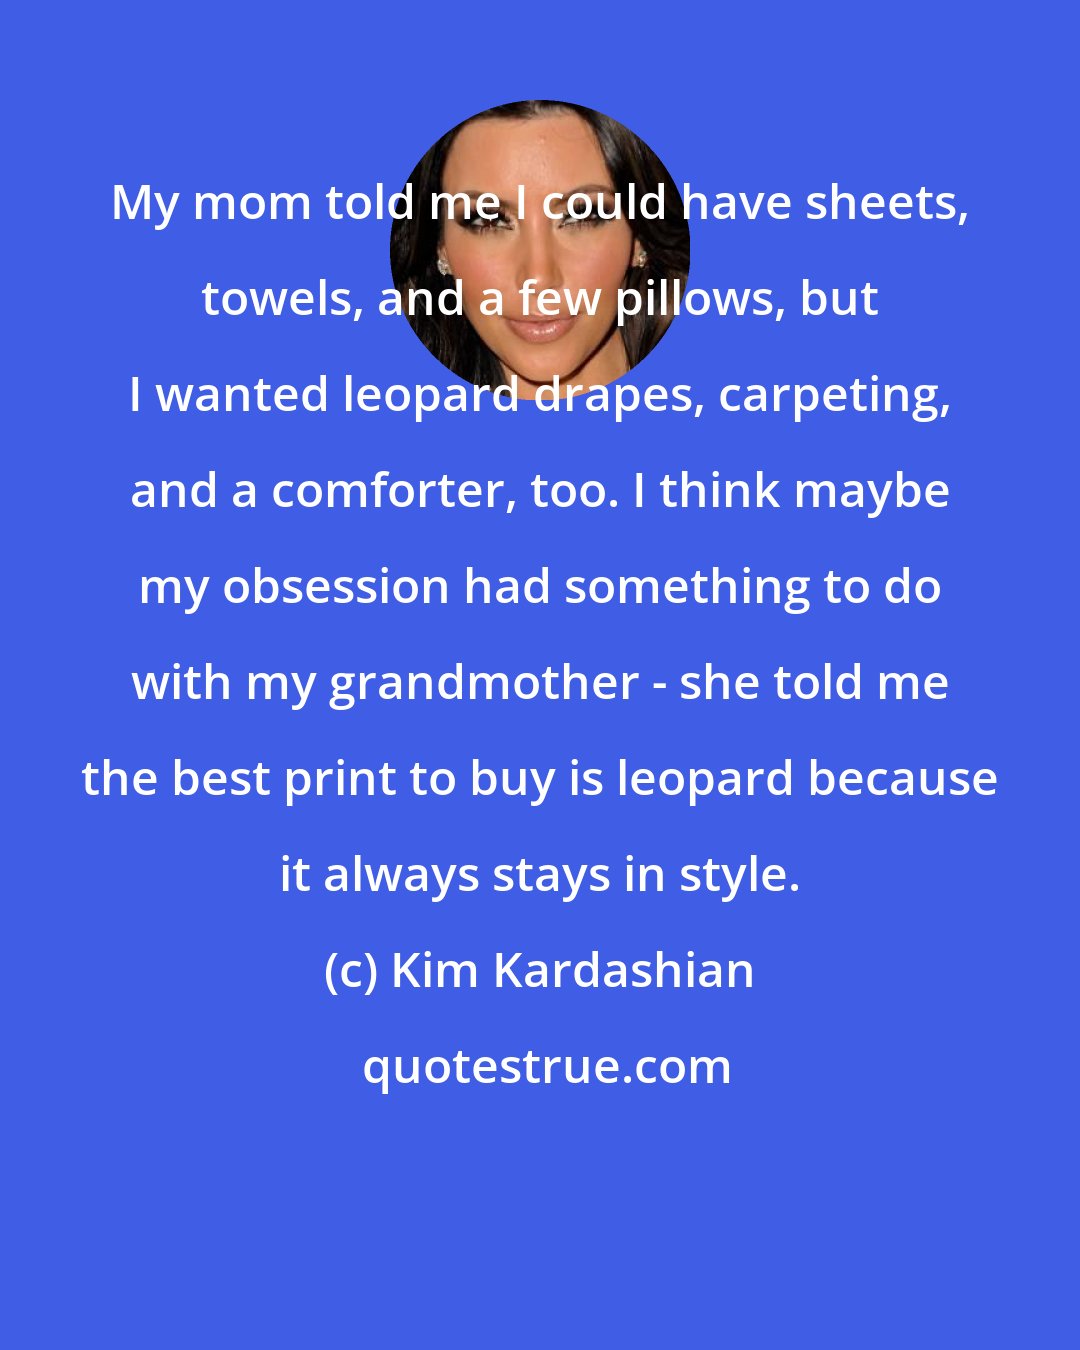 Kim Kardashian: My mom told me I could have sheets, towels, and a few pillows, but I wanted leopard drapes, carpeting, and a comforter, too. I think maybe my obsession had something to do with my grandmother - she told me the best print to buy is leopard because it always stays in style.